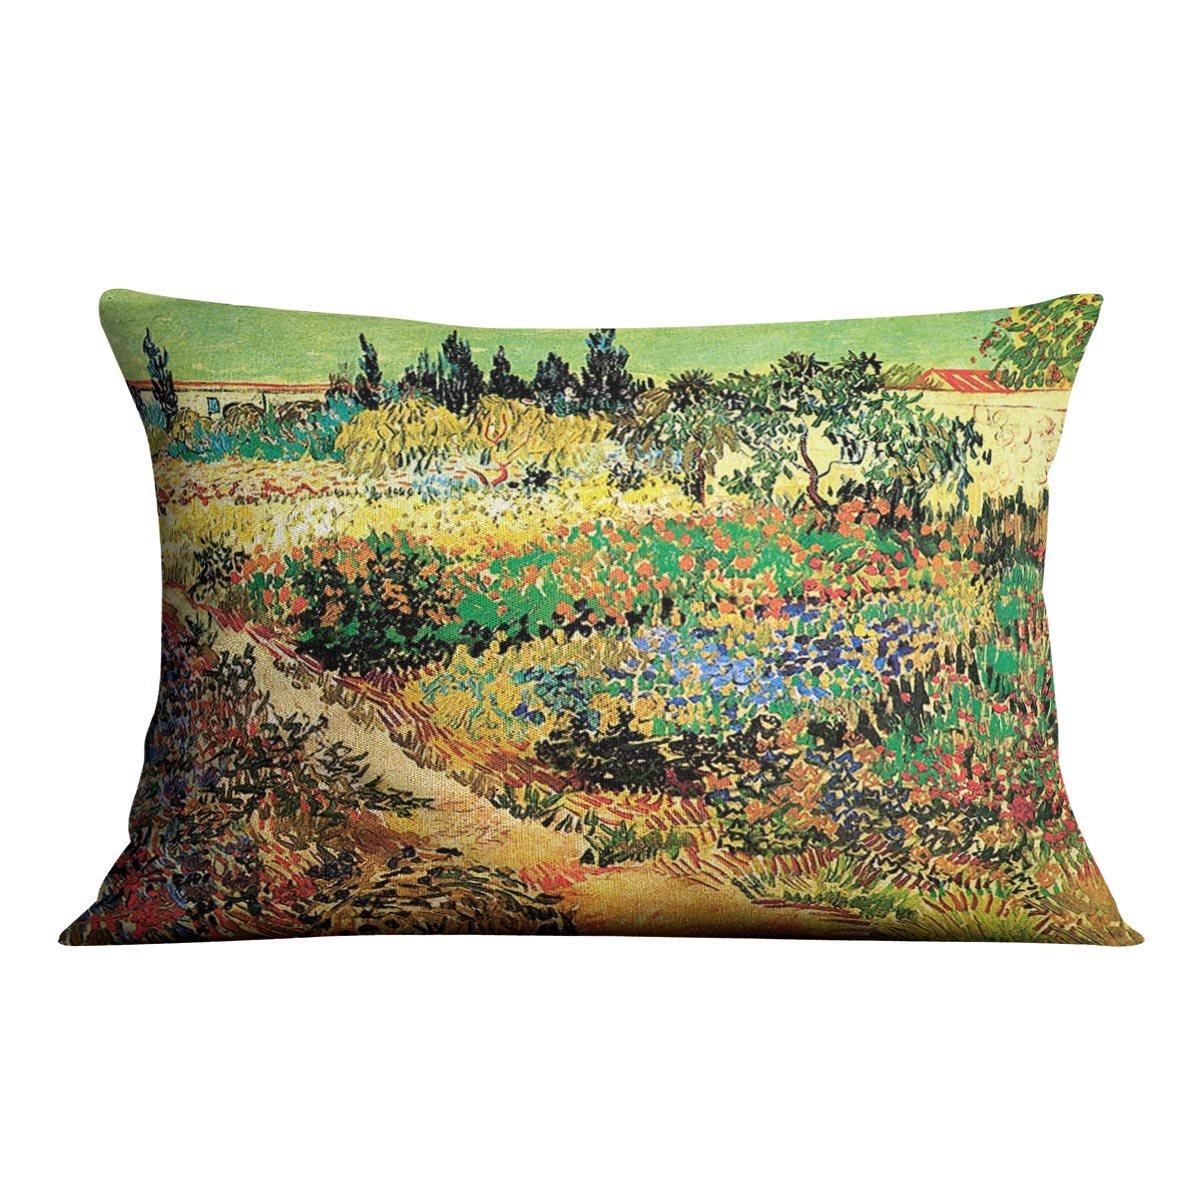 Flowering Garden with Path by Van Gogh Throw Pillow